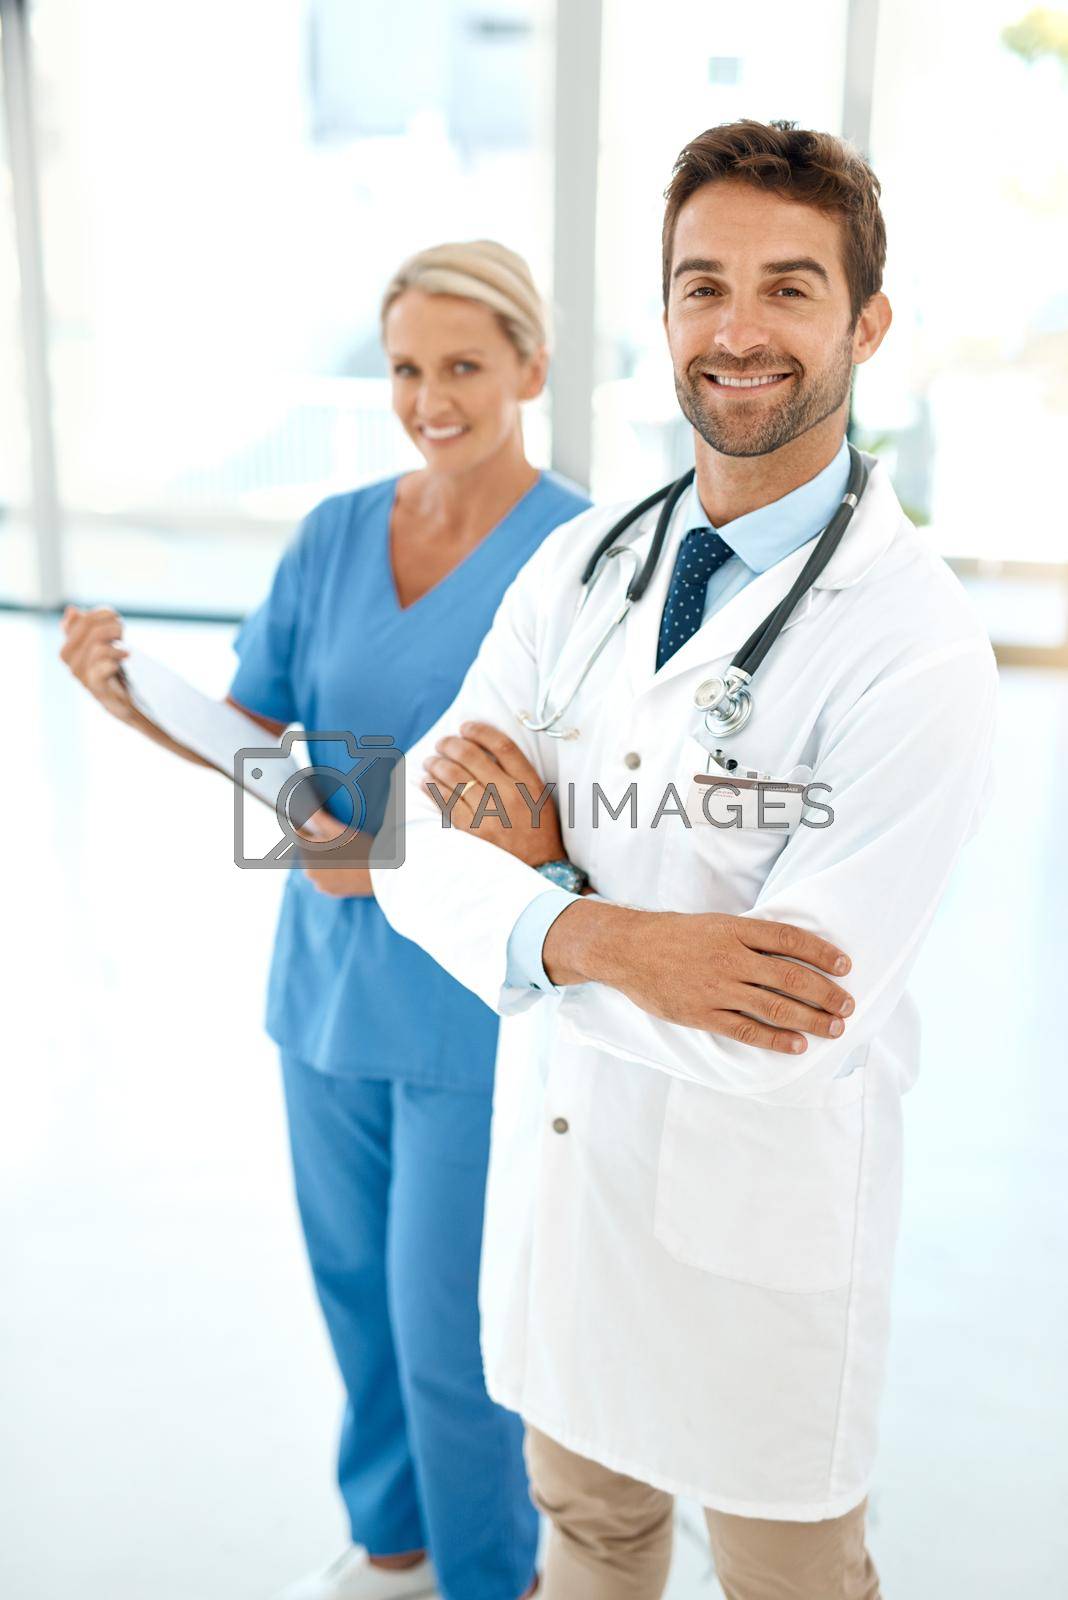 Royalty free image of We save lives, together. Cropped portrait of two happy healthcare practitioners posing together in a hospital. by YuriArcurs